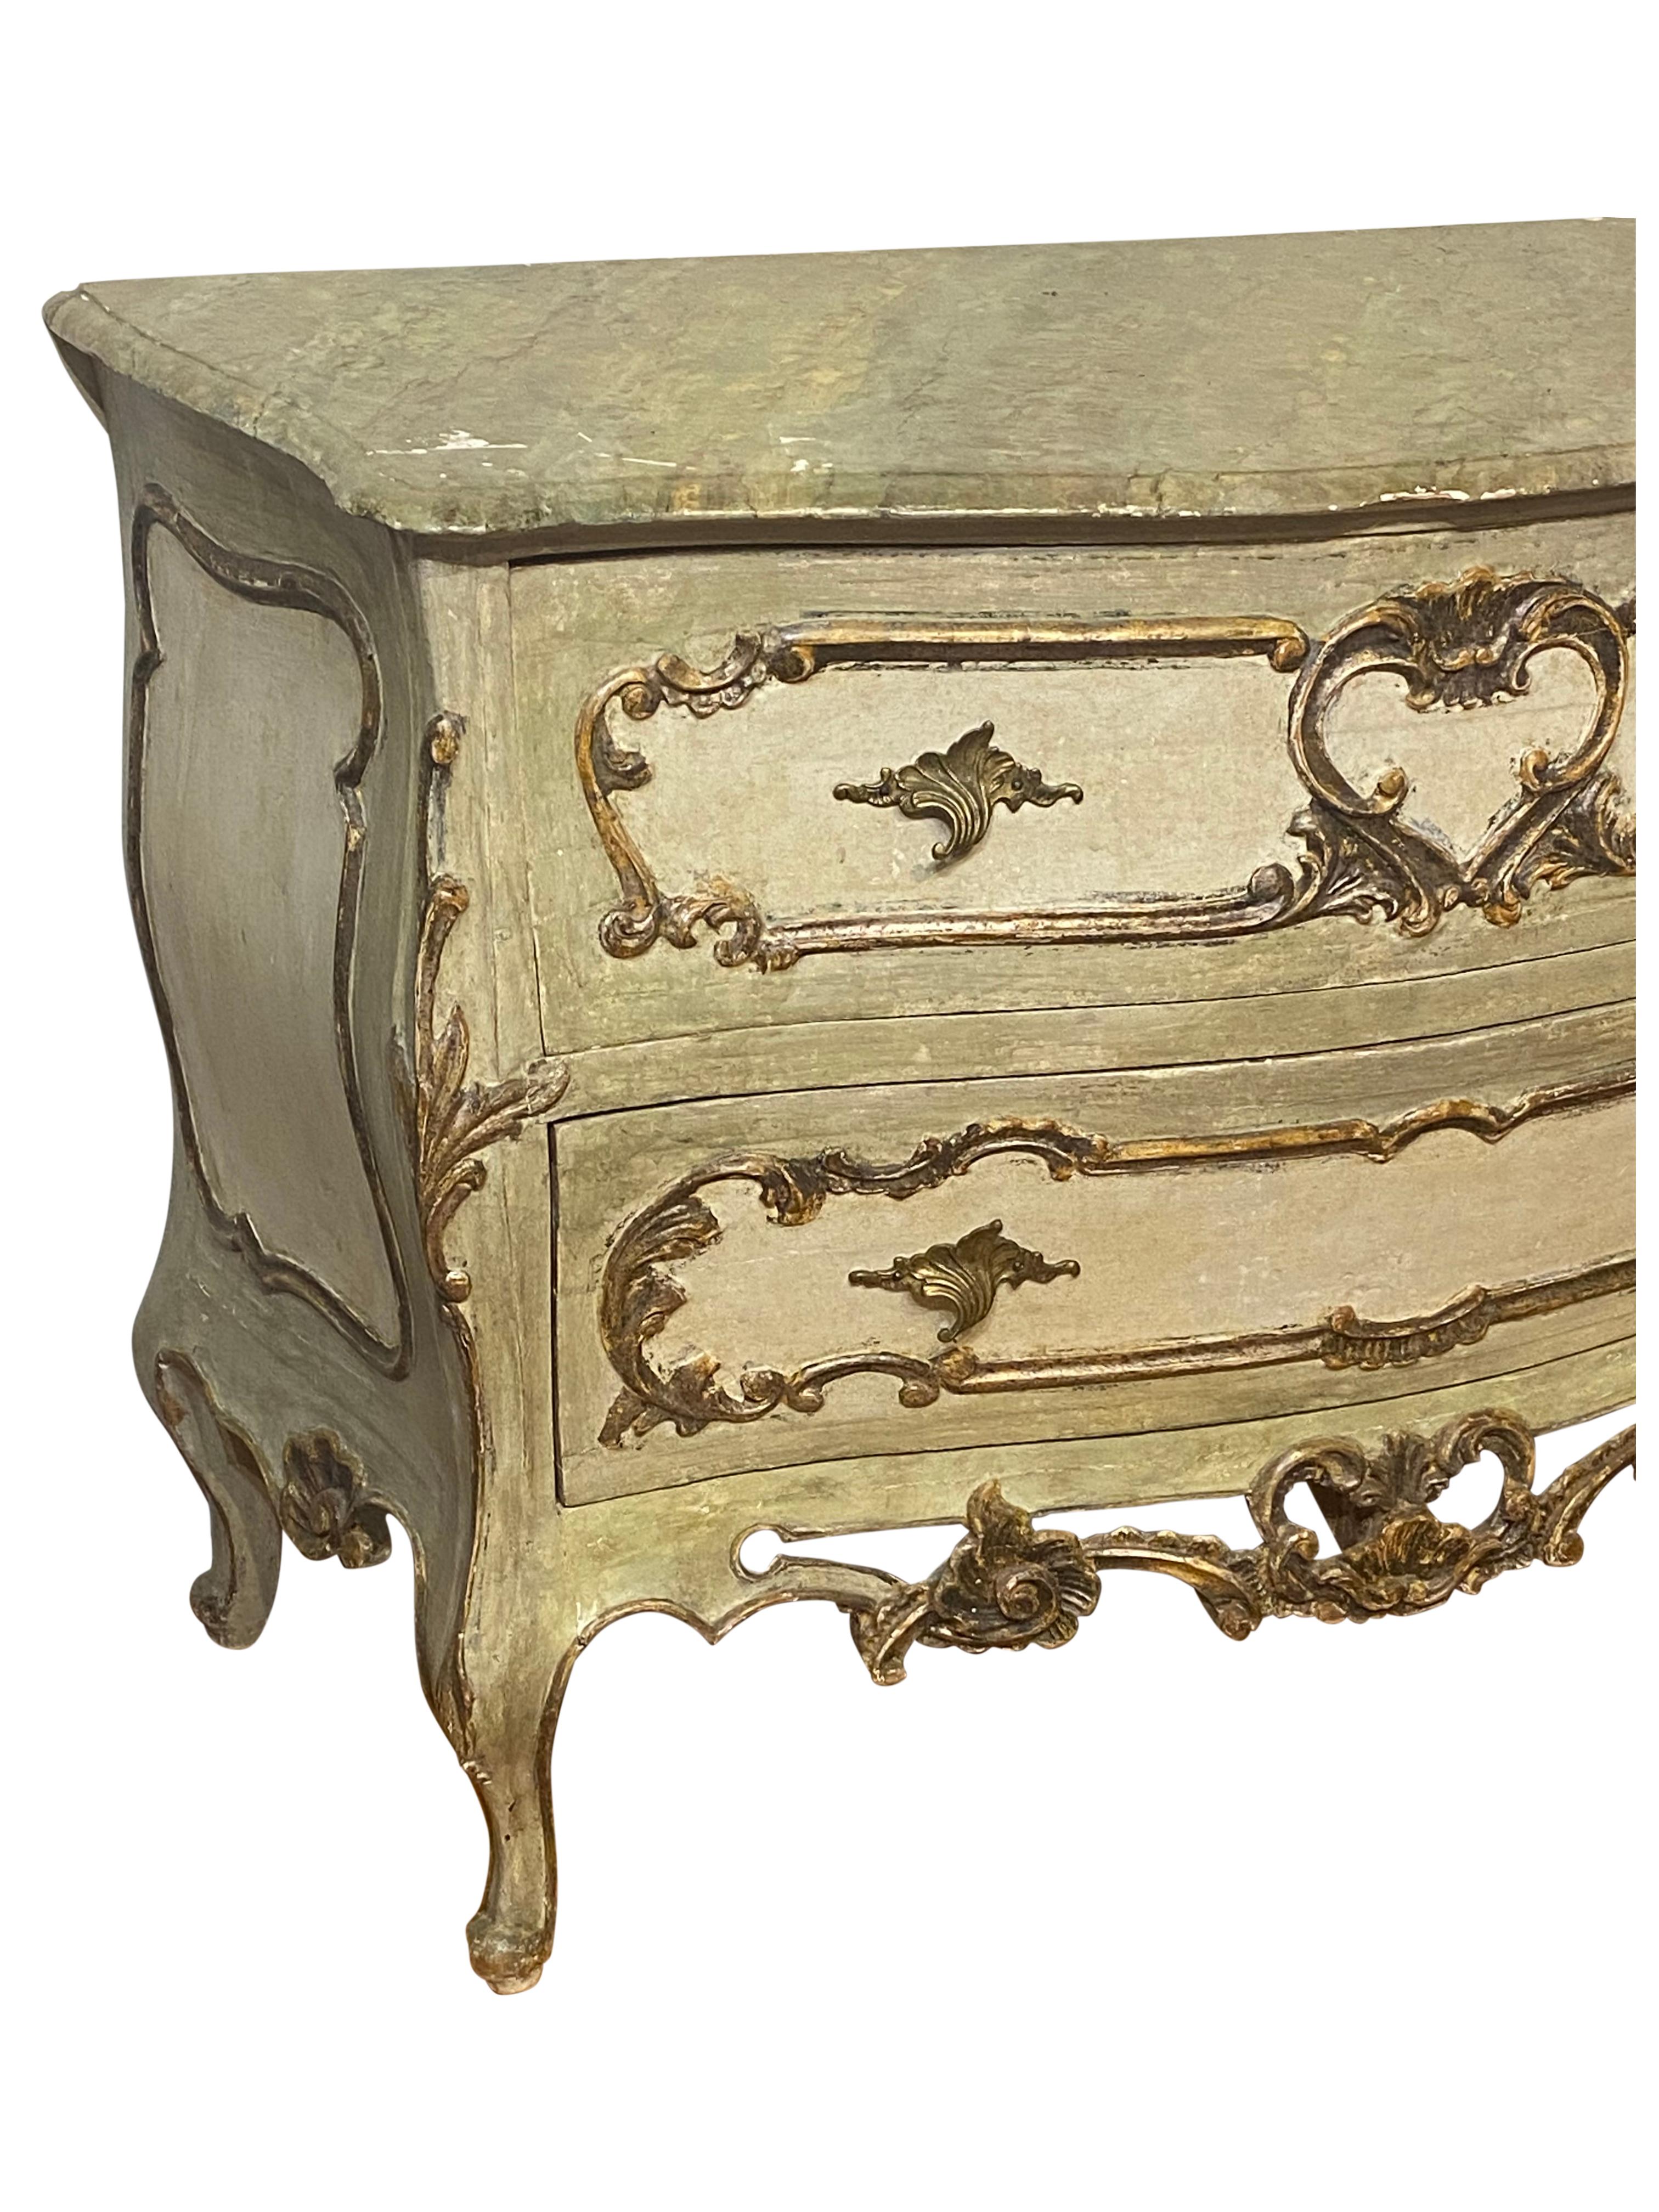 19th Century Venetian Painted Rococo Commode, 19th C in 18th C Style